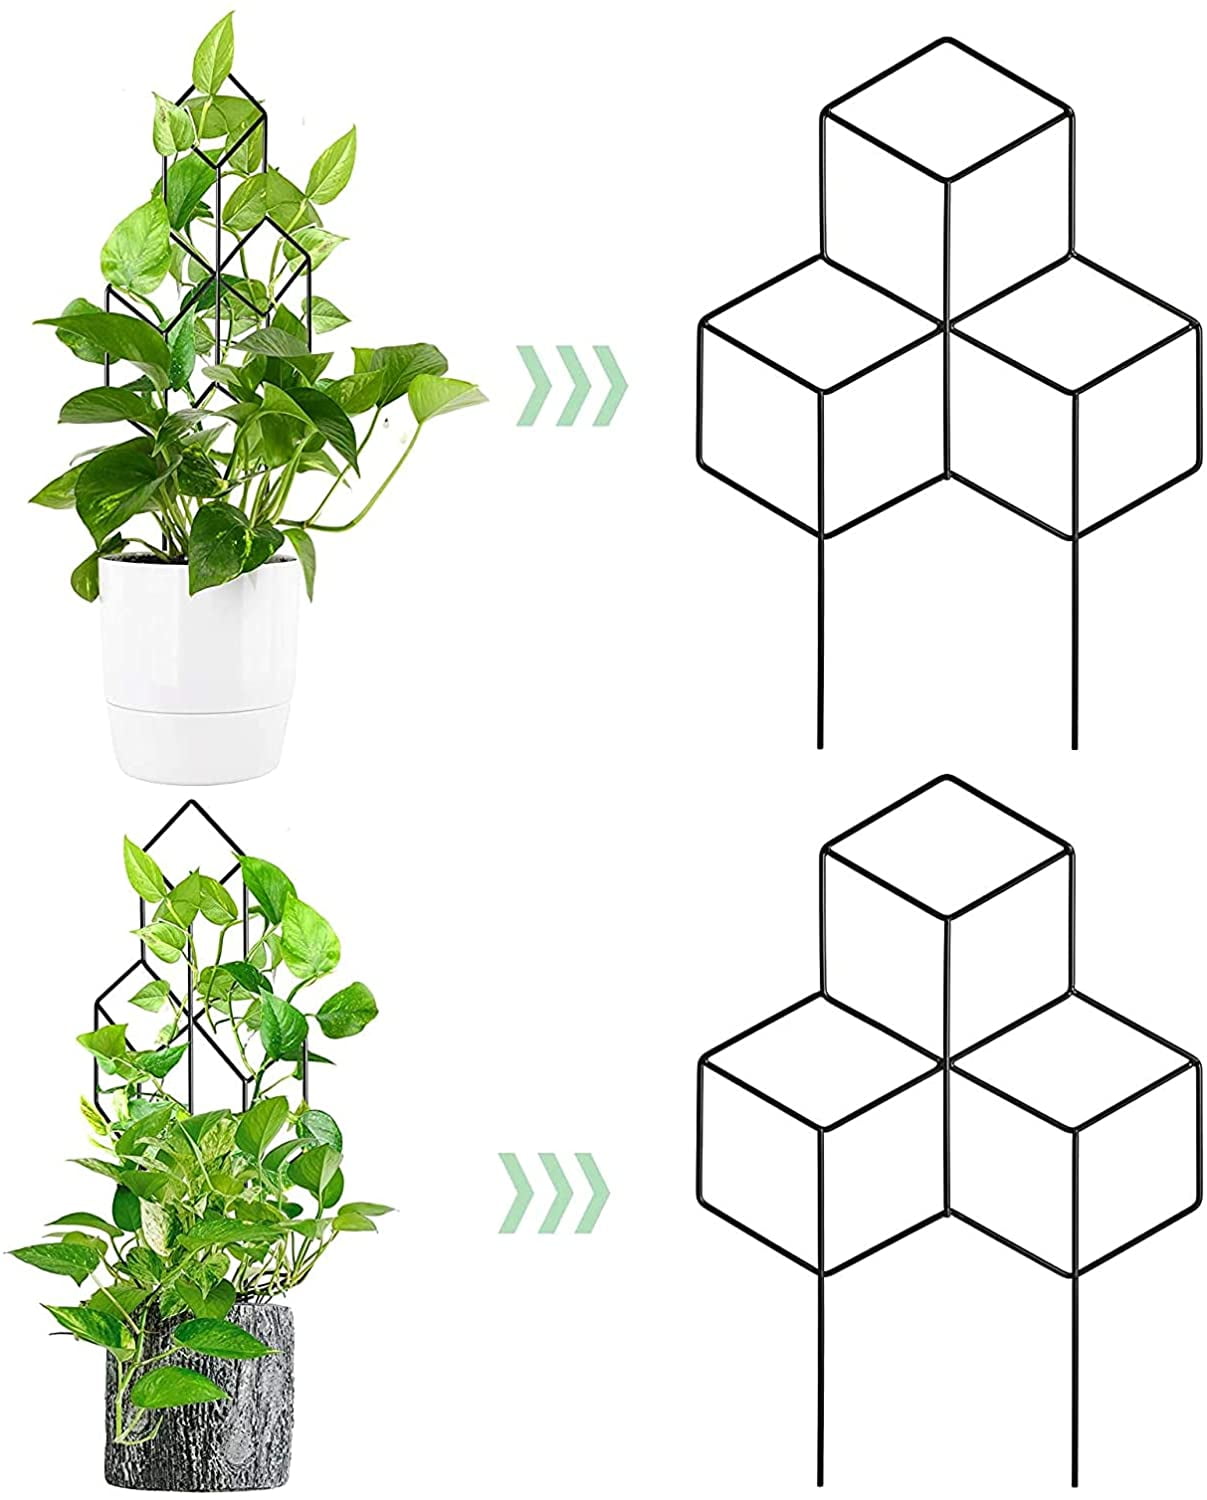 13 Rust Free Vine Plant Metal Support Wire with Black Coating Decorative Potted Plants Climbing Holder Rack for Garden Stem Stalks Vines Round 2 Pack Black Iron Garden Trellis for Climbing Plants 